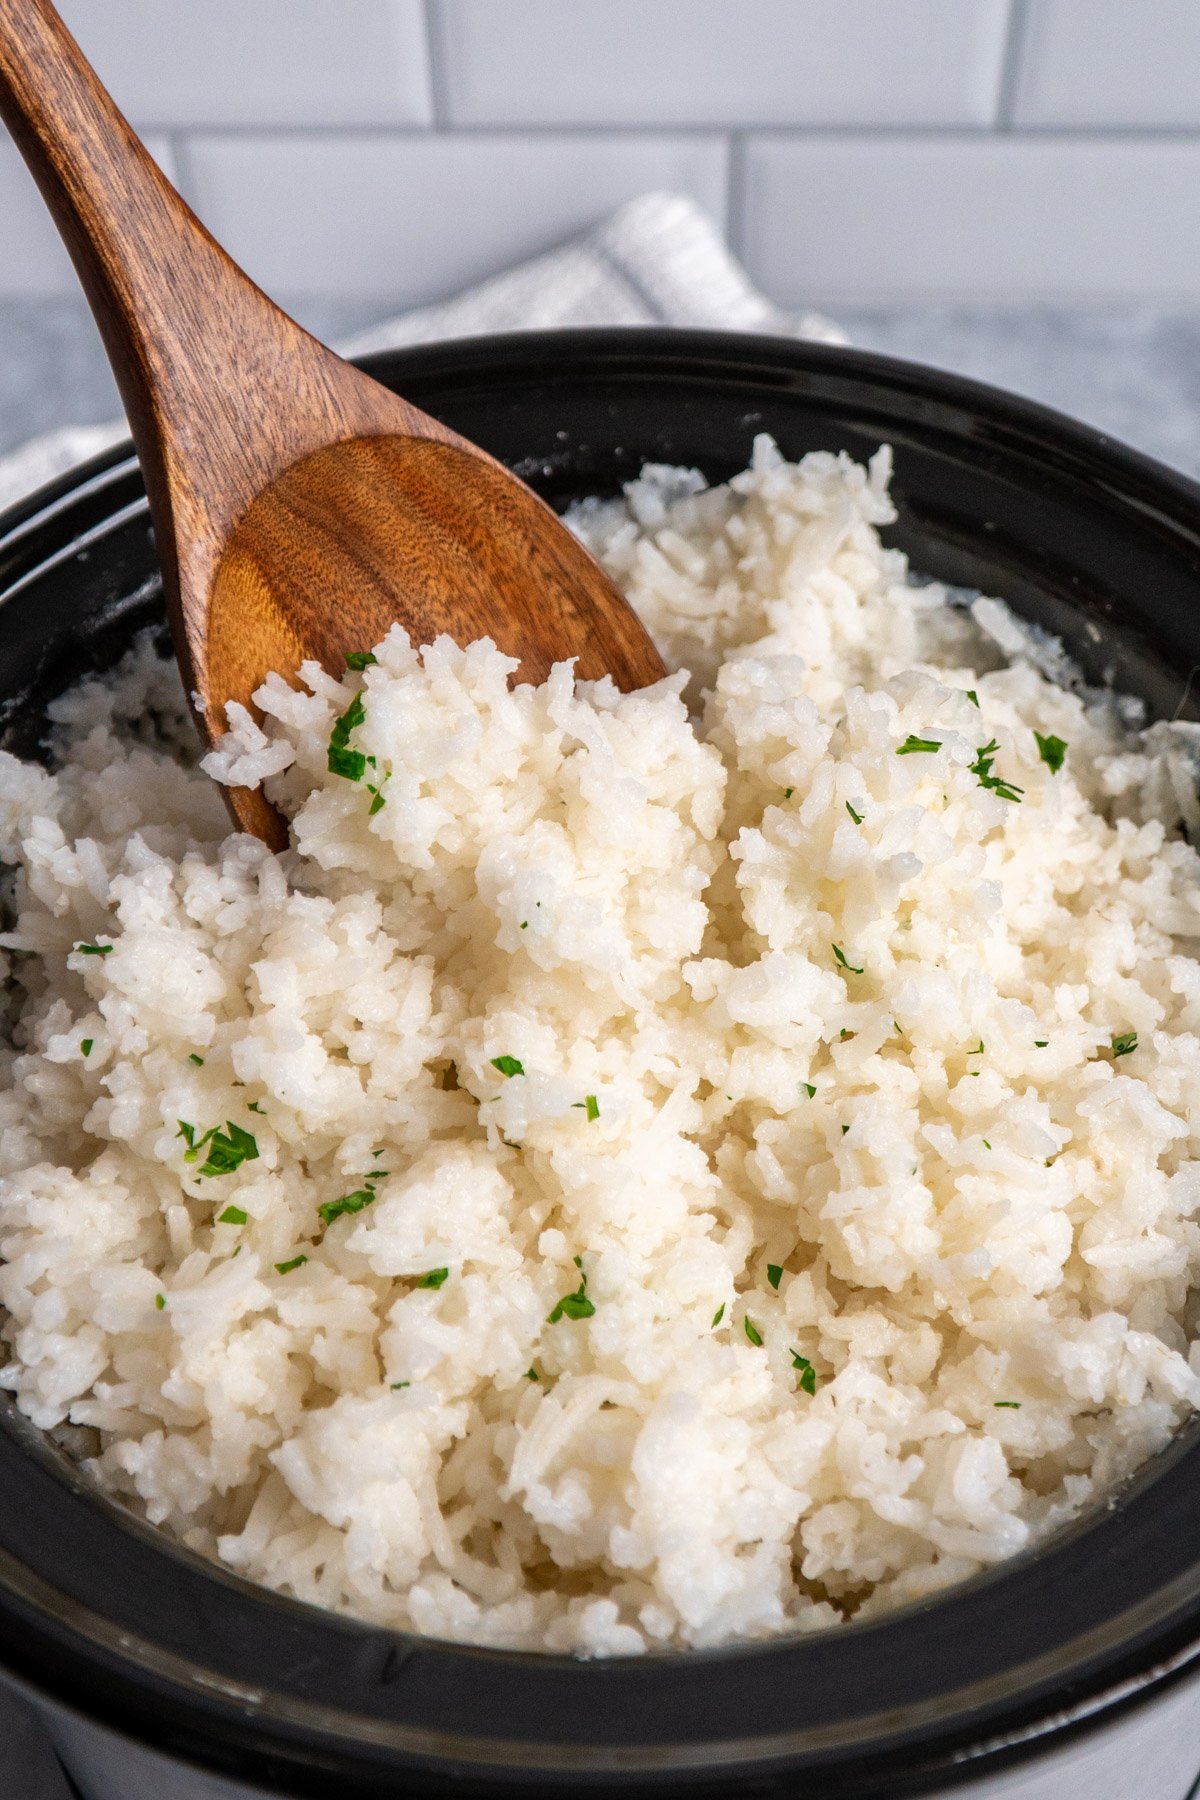 White rice in a crock pot with a wooden spoon.